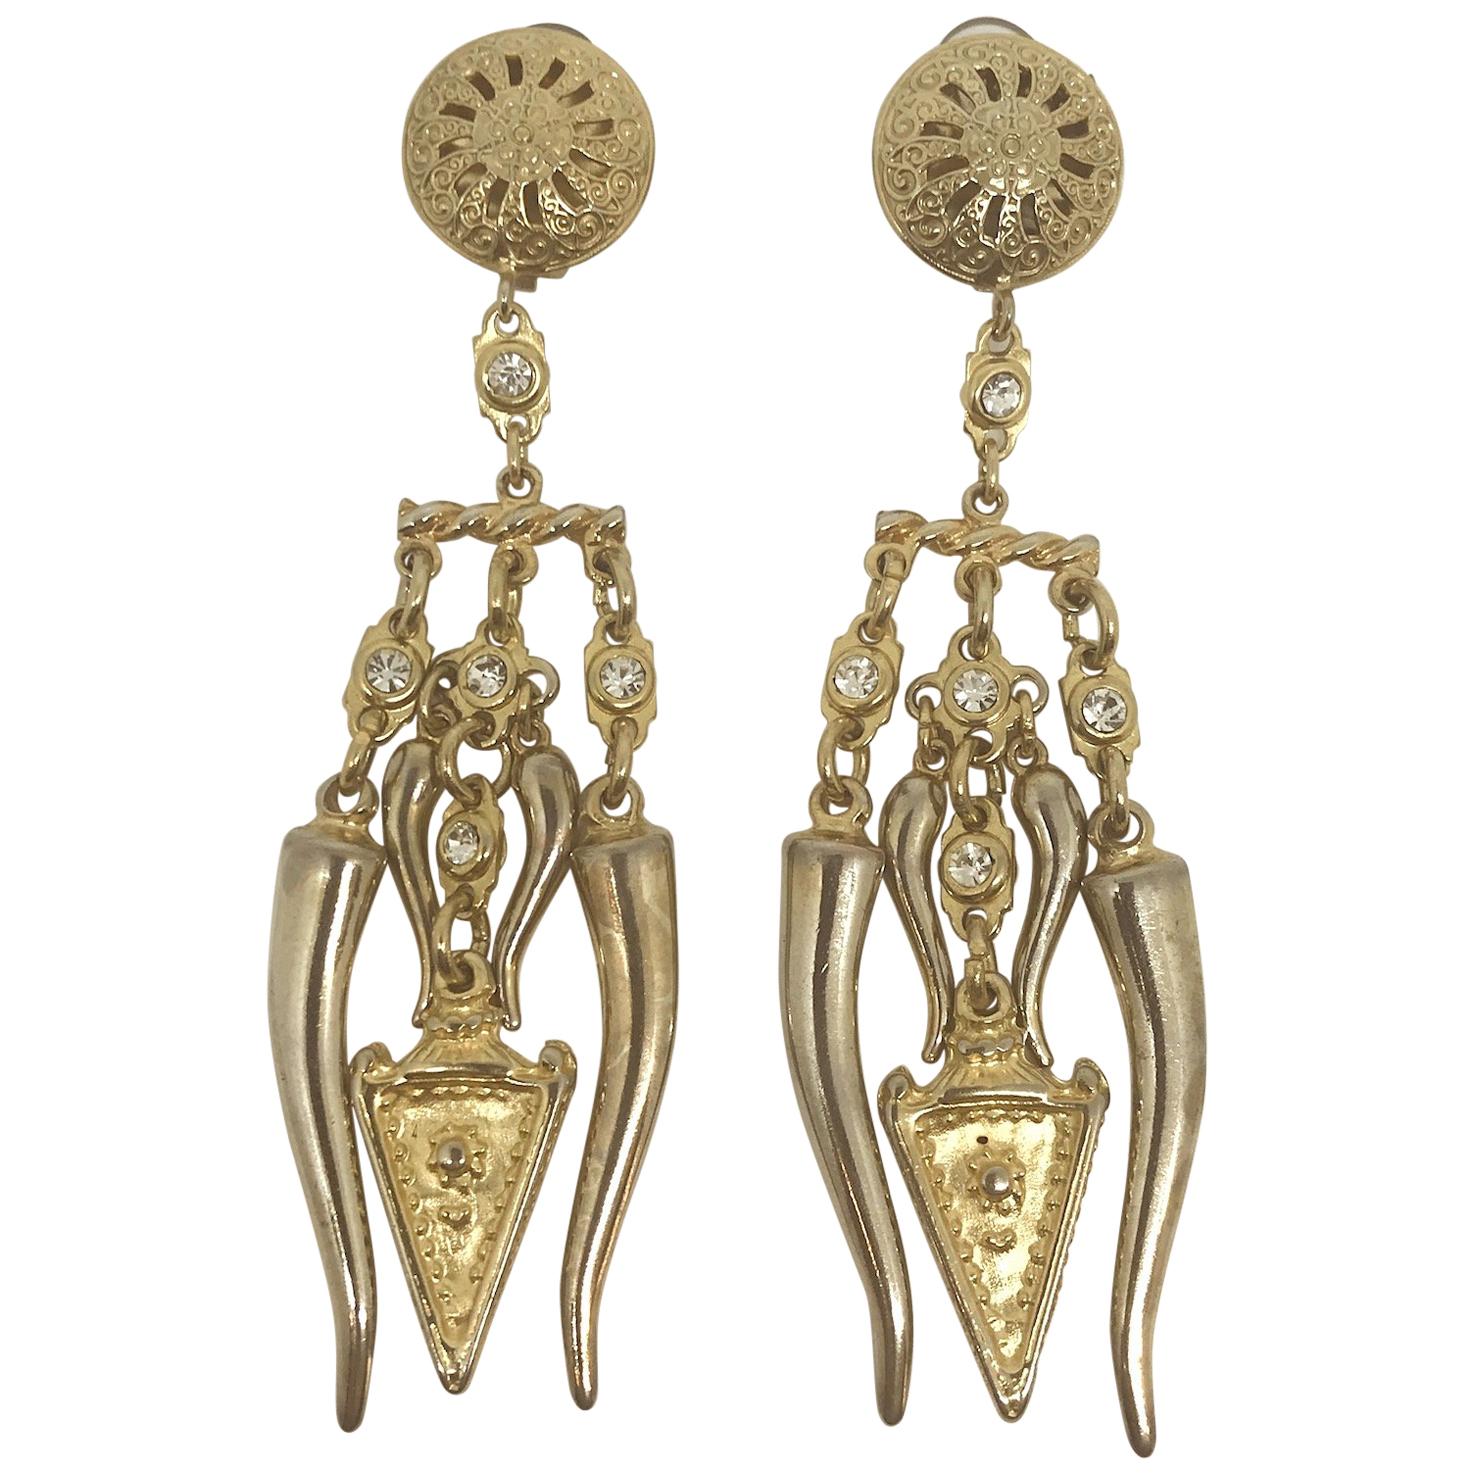 Carlo Zini 4.5" long Etruscan style earrings from Elsa Martinelli's collection